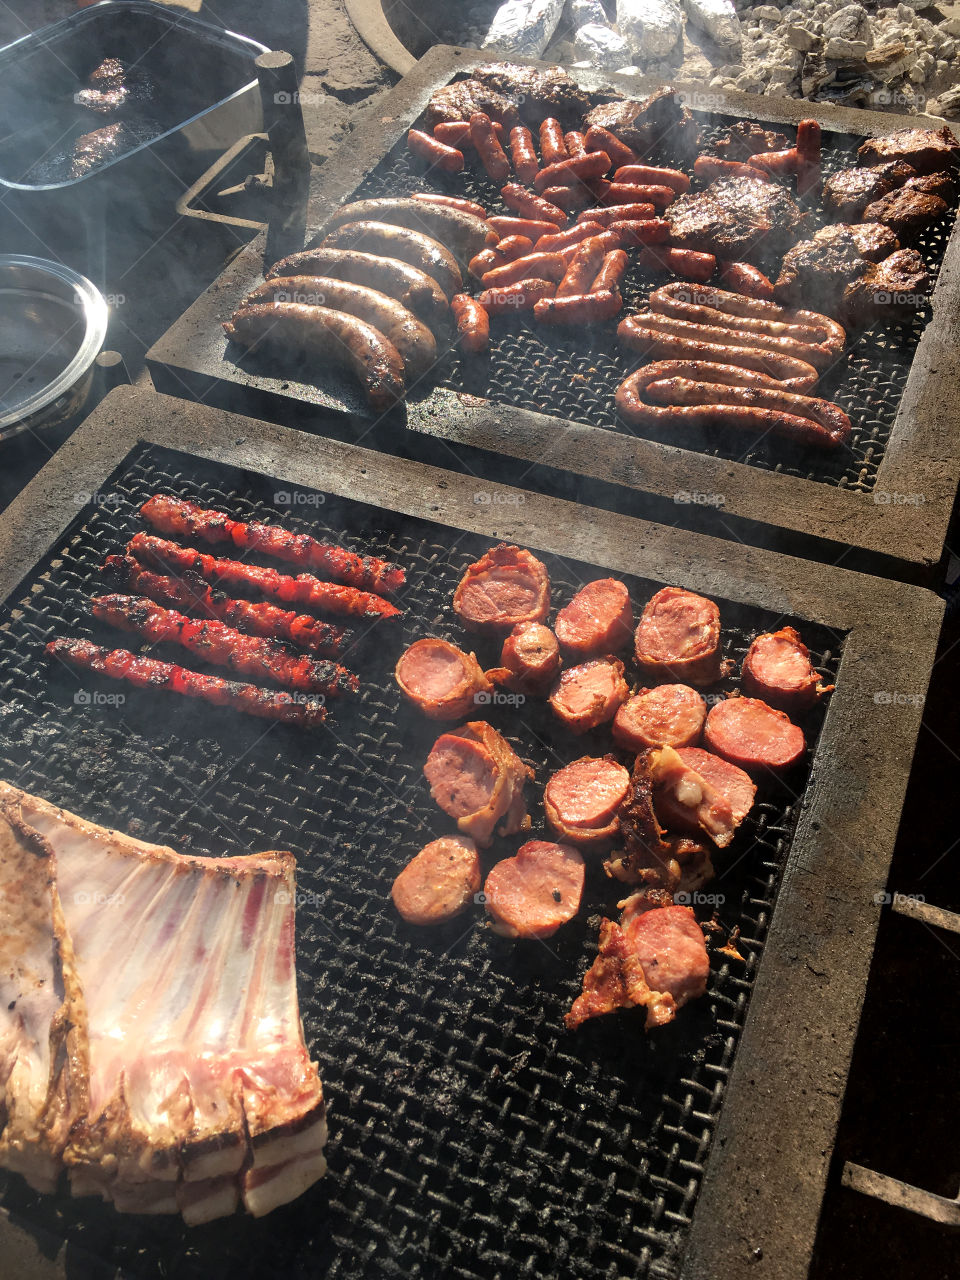 Barbecue is Braai in South Africa